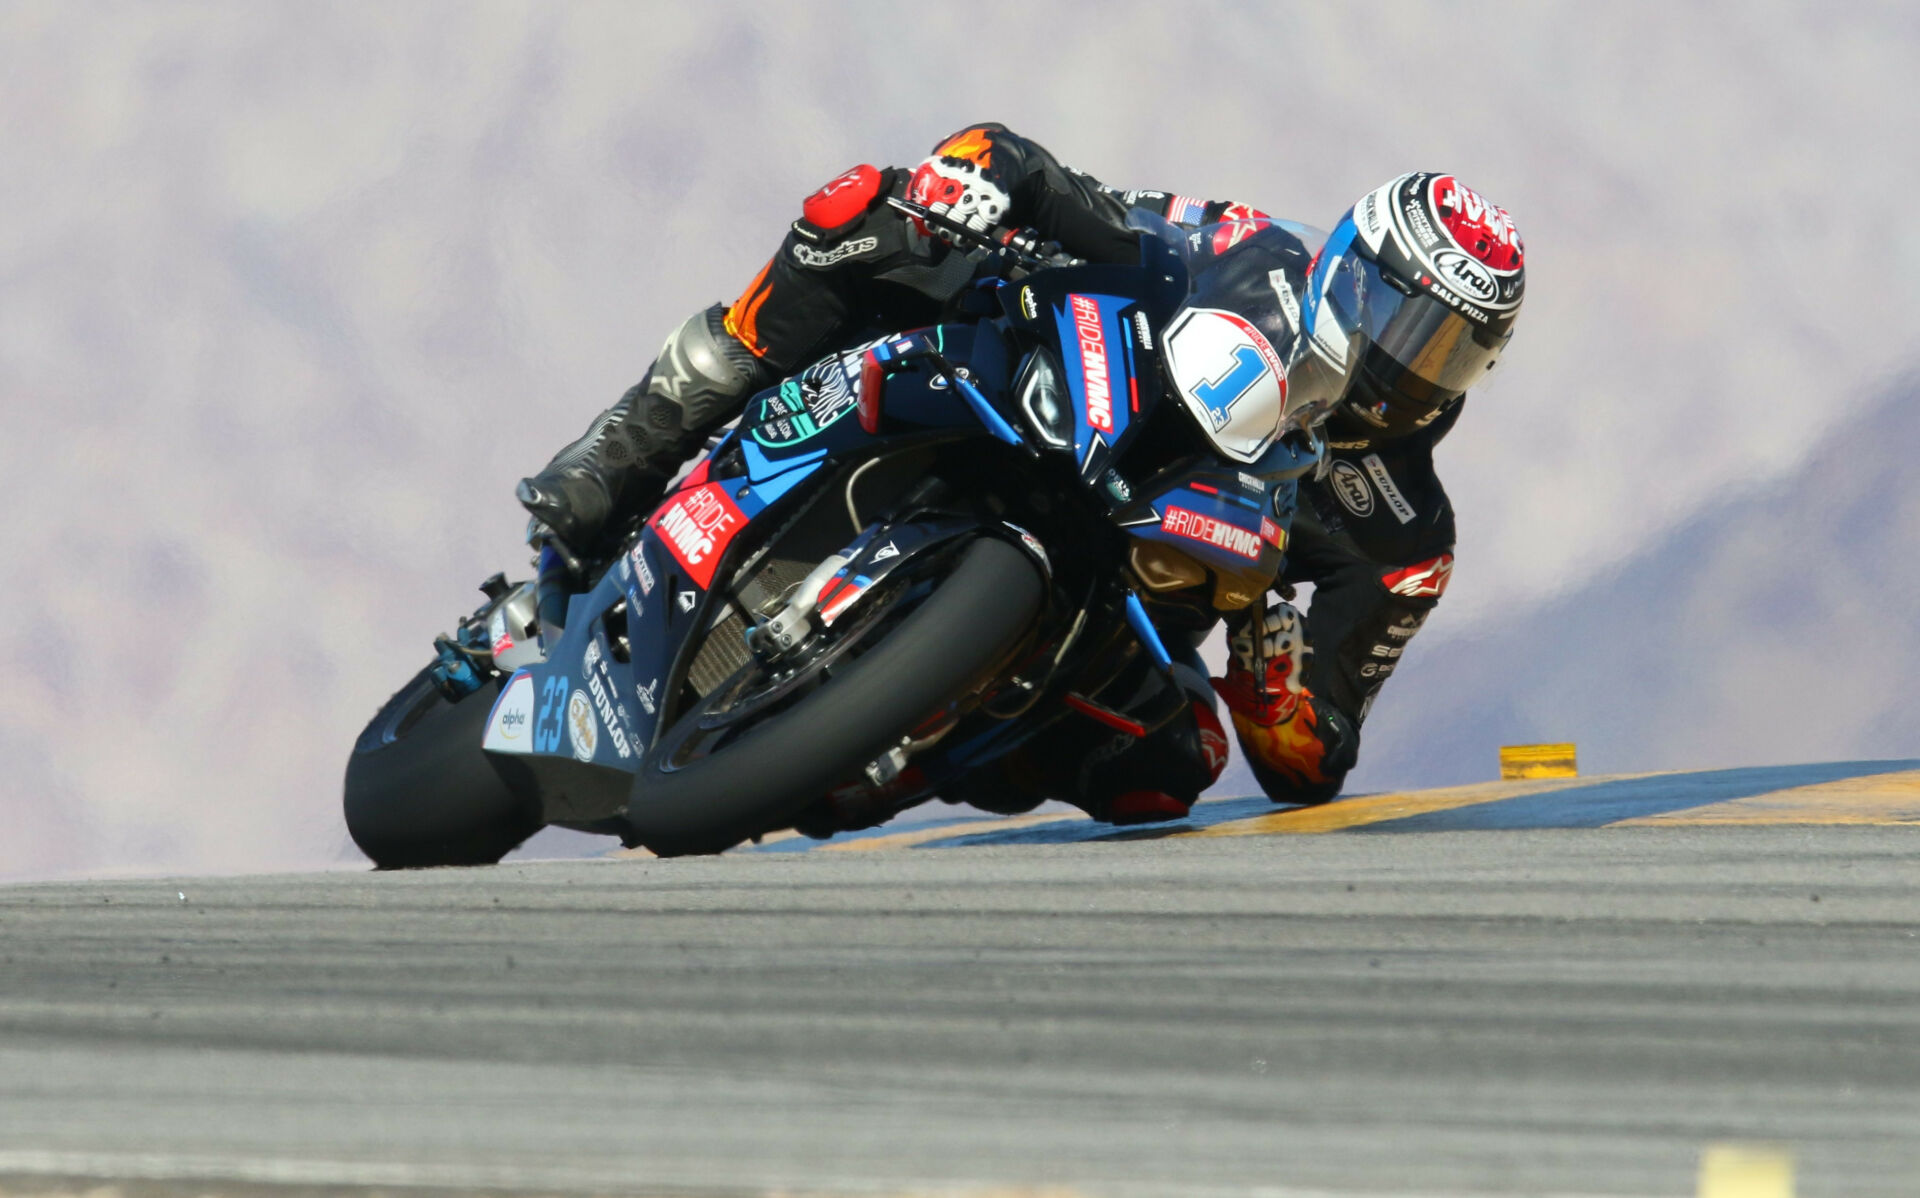 Corey Alexander (1) won the Stock 1000 Shootout on his BMW M 1000 RR and placed third in the Mediumweight Shootout on his new Ducati Panigale V2. Photo by CaliPhotography, courtesy CVMA.